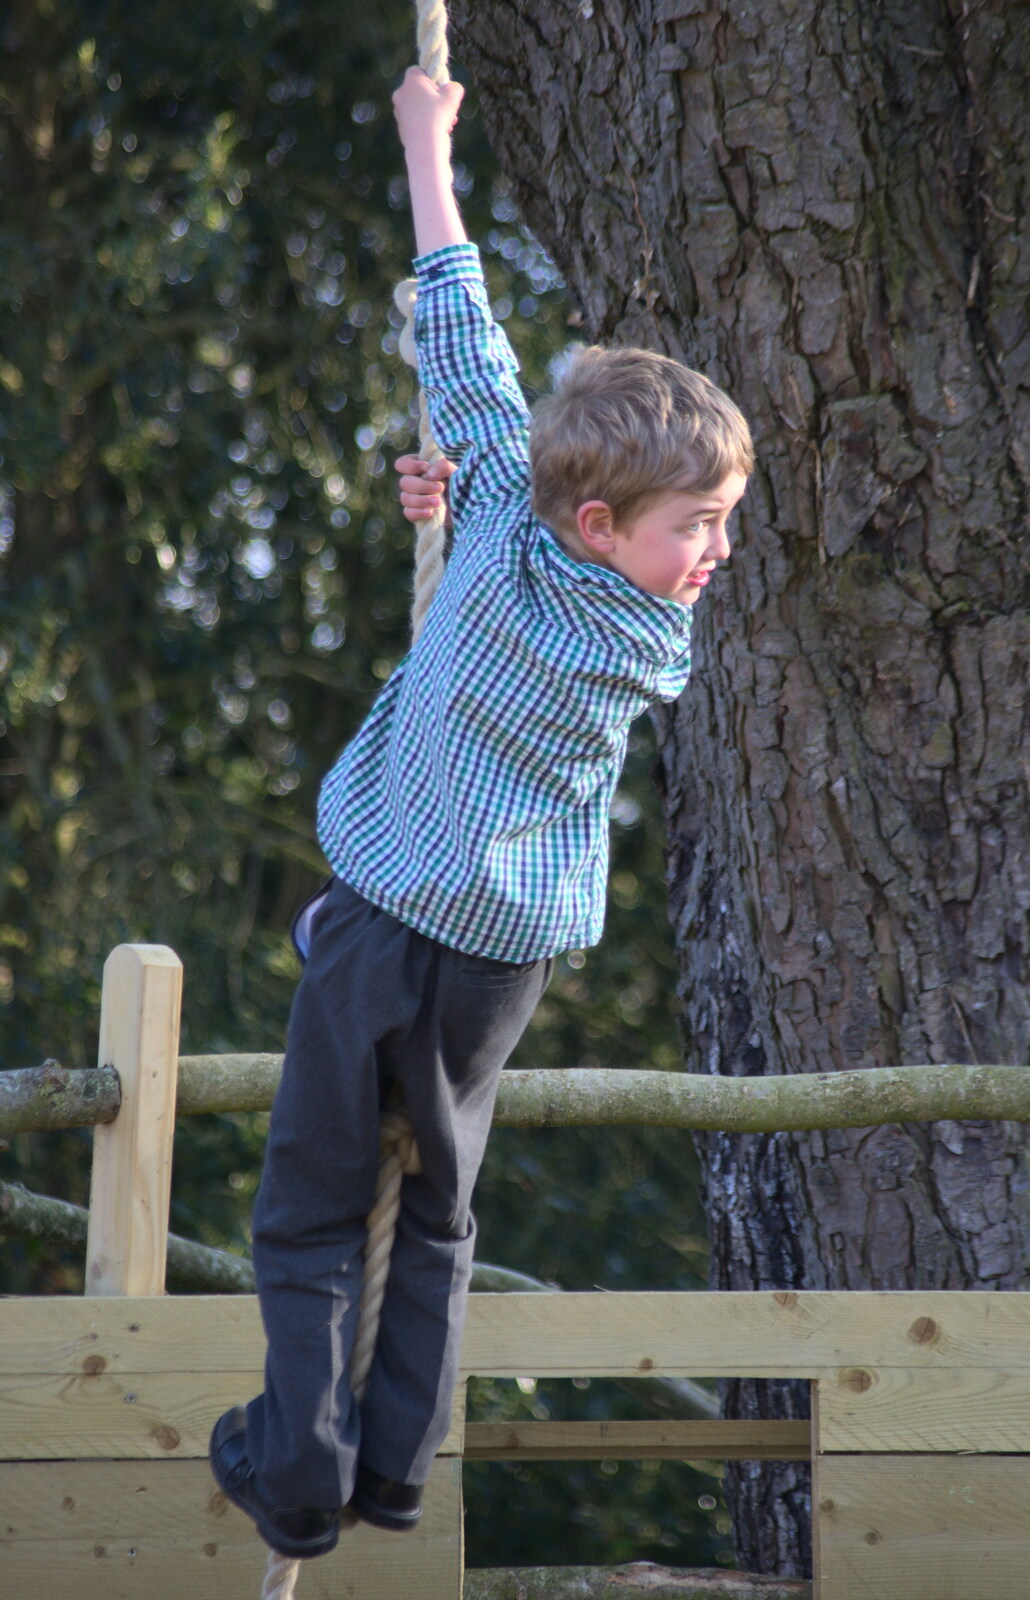 Fred's up the rope again from The Oaksmere's First Year Anniversary, Brome, Suffolk - 23rd April 2015